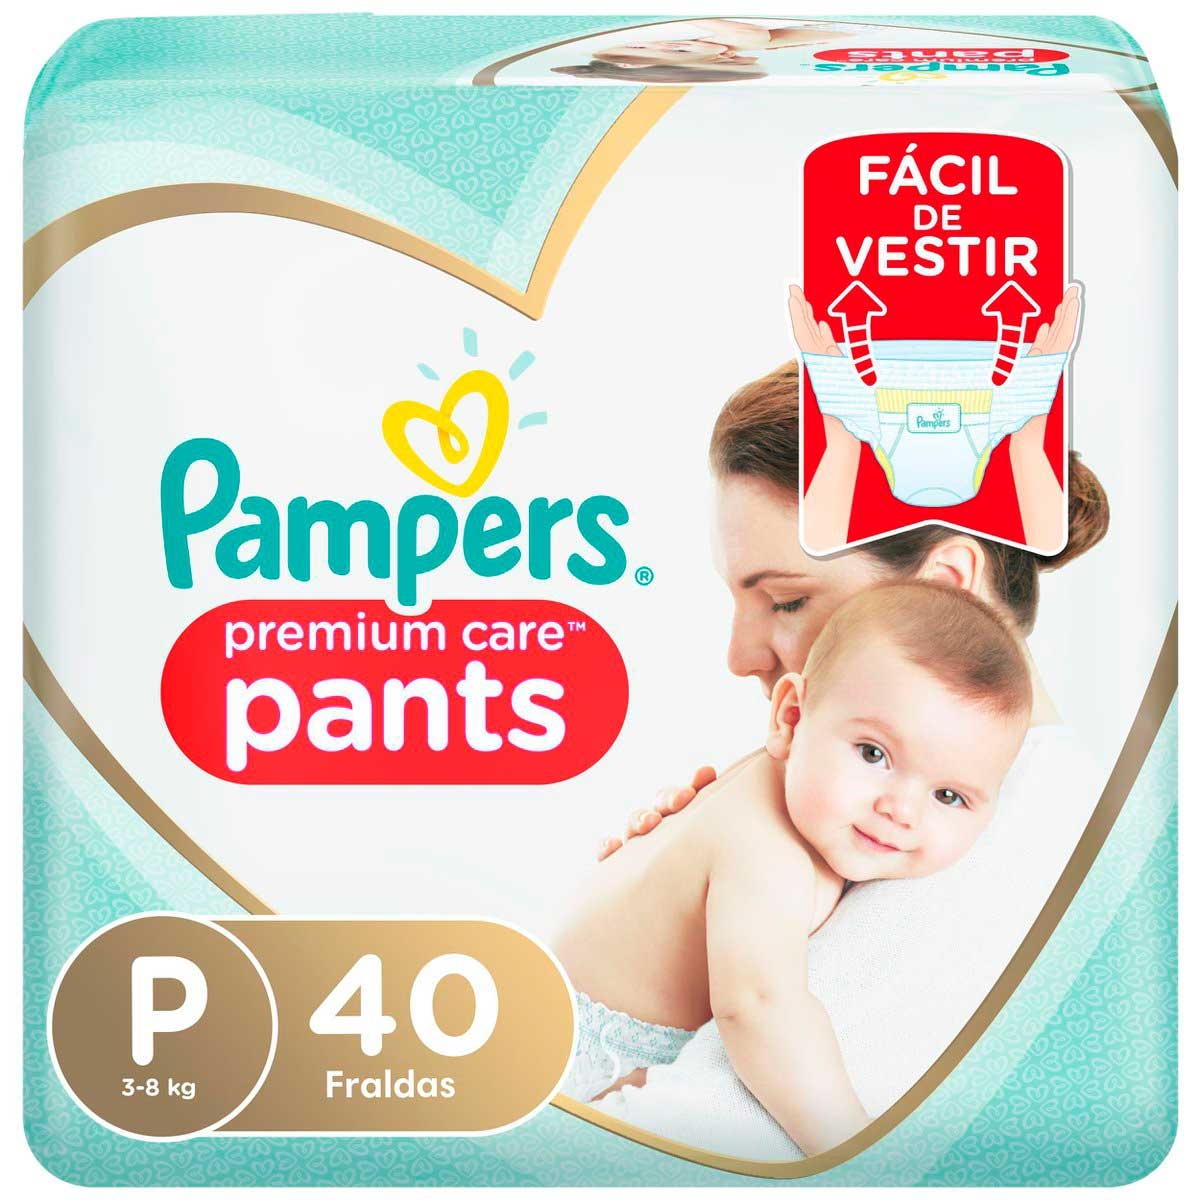 Buy Pampers Premium Care Diapers Pants, Small at Best Price from Mumpa - 24